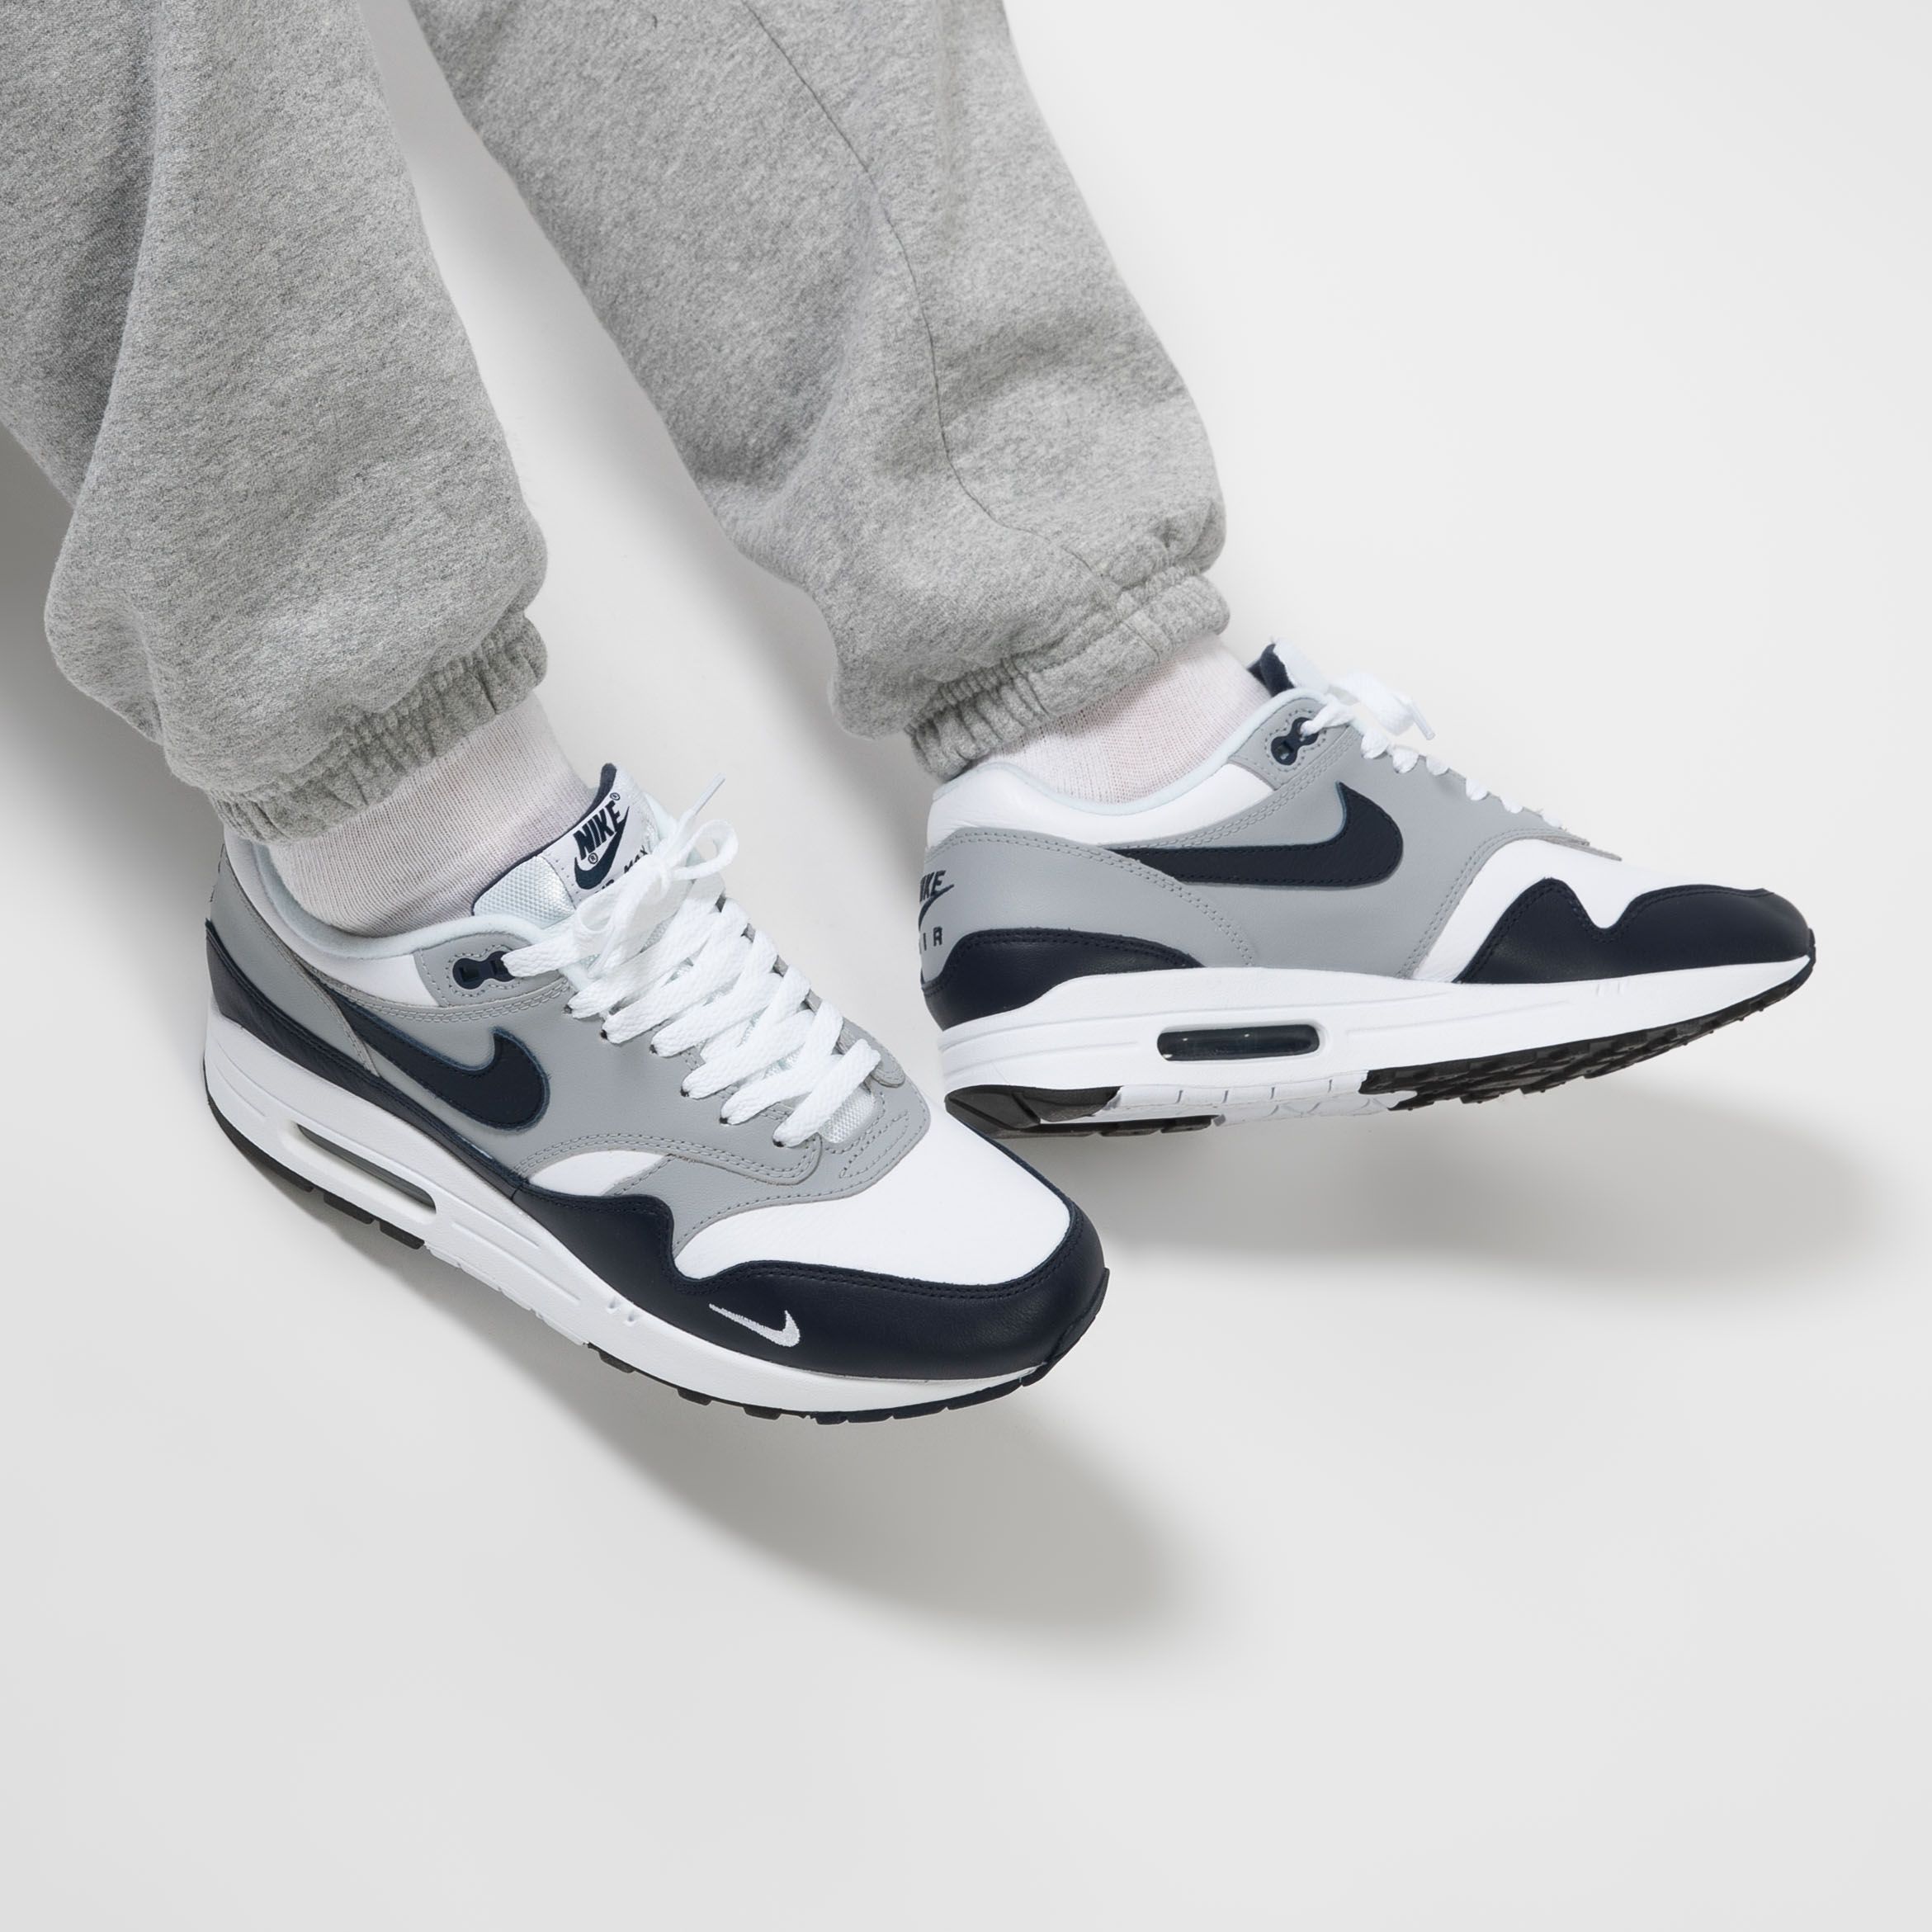 Titolo on X: coming soon.⁠ The Nike Air Max 1 Lv8 Obsidian will drop  Saturday, 23st January online 9AM CET. be there ➡️   sizerun 🏃🏽‍♂️ US 6 (38.5) - US 12 (